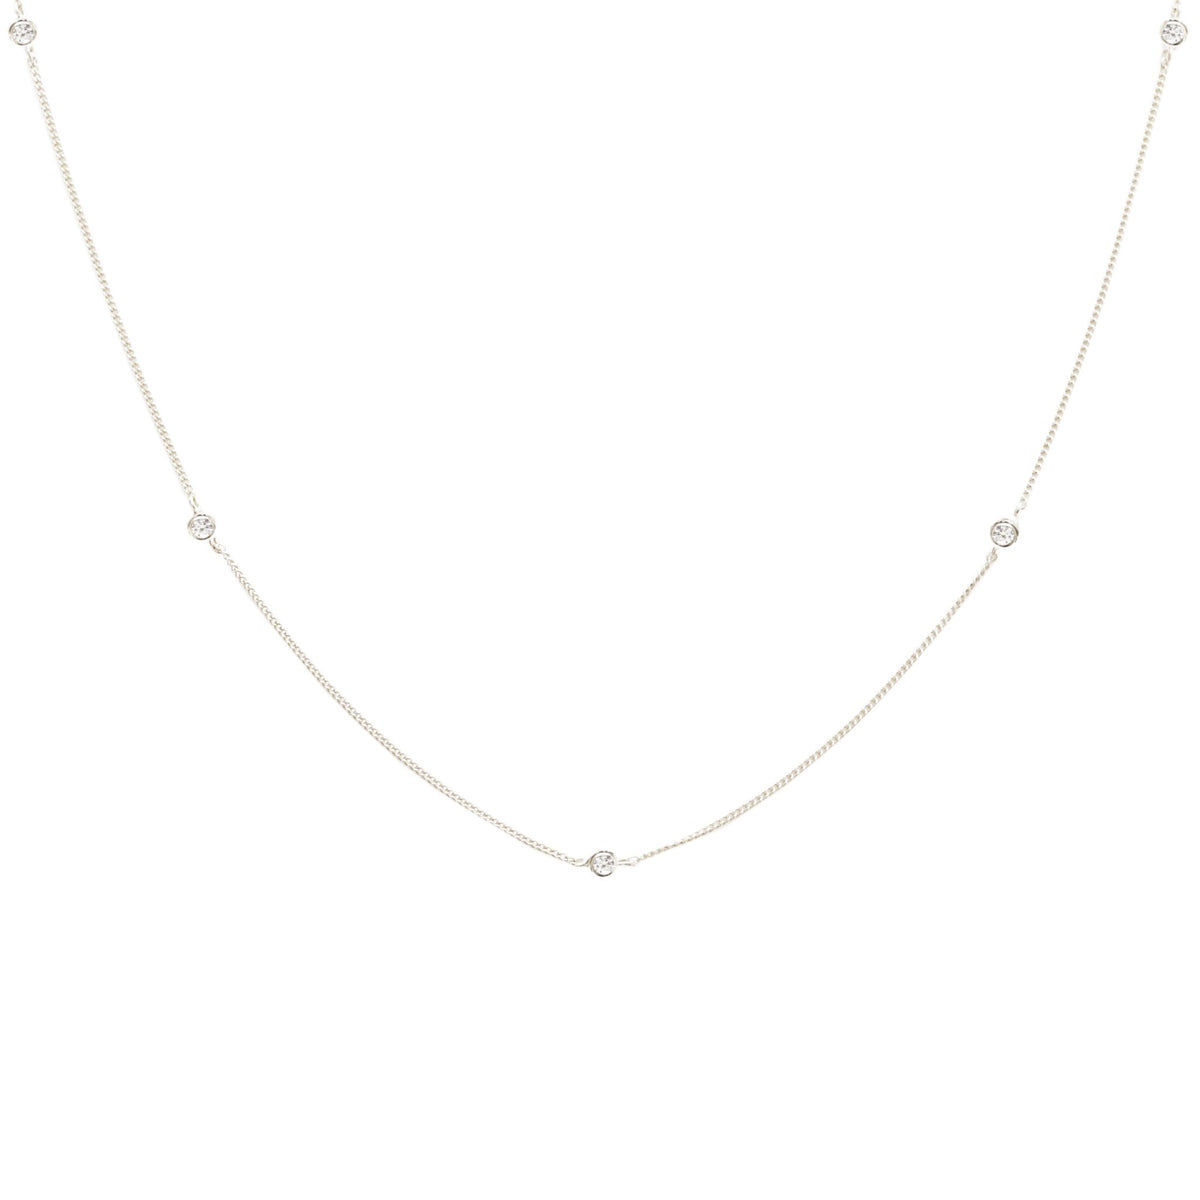 Tiny Love Necklace - Cubic Zirconia &amp; Silver - SO PRETTY CARA COTTER